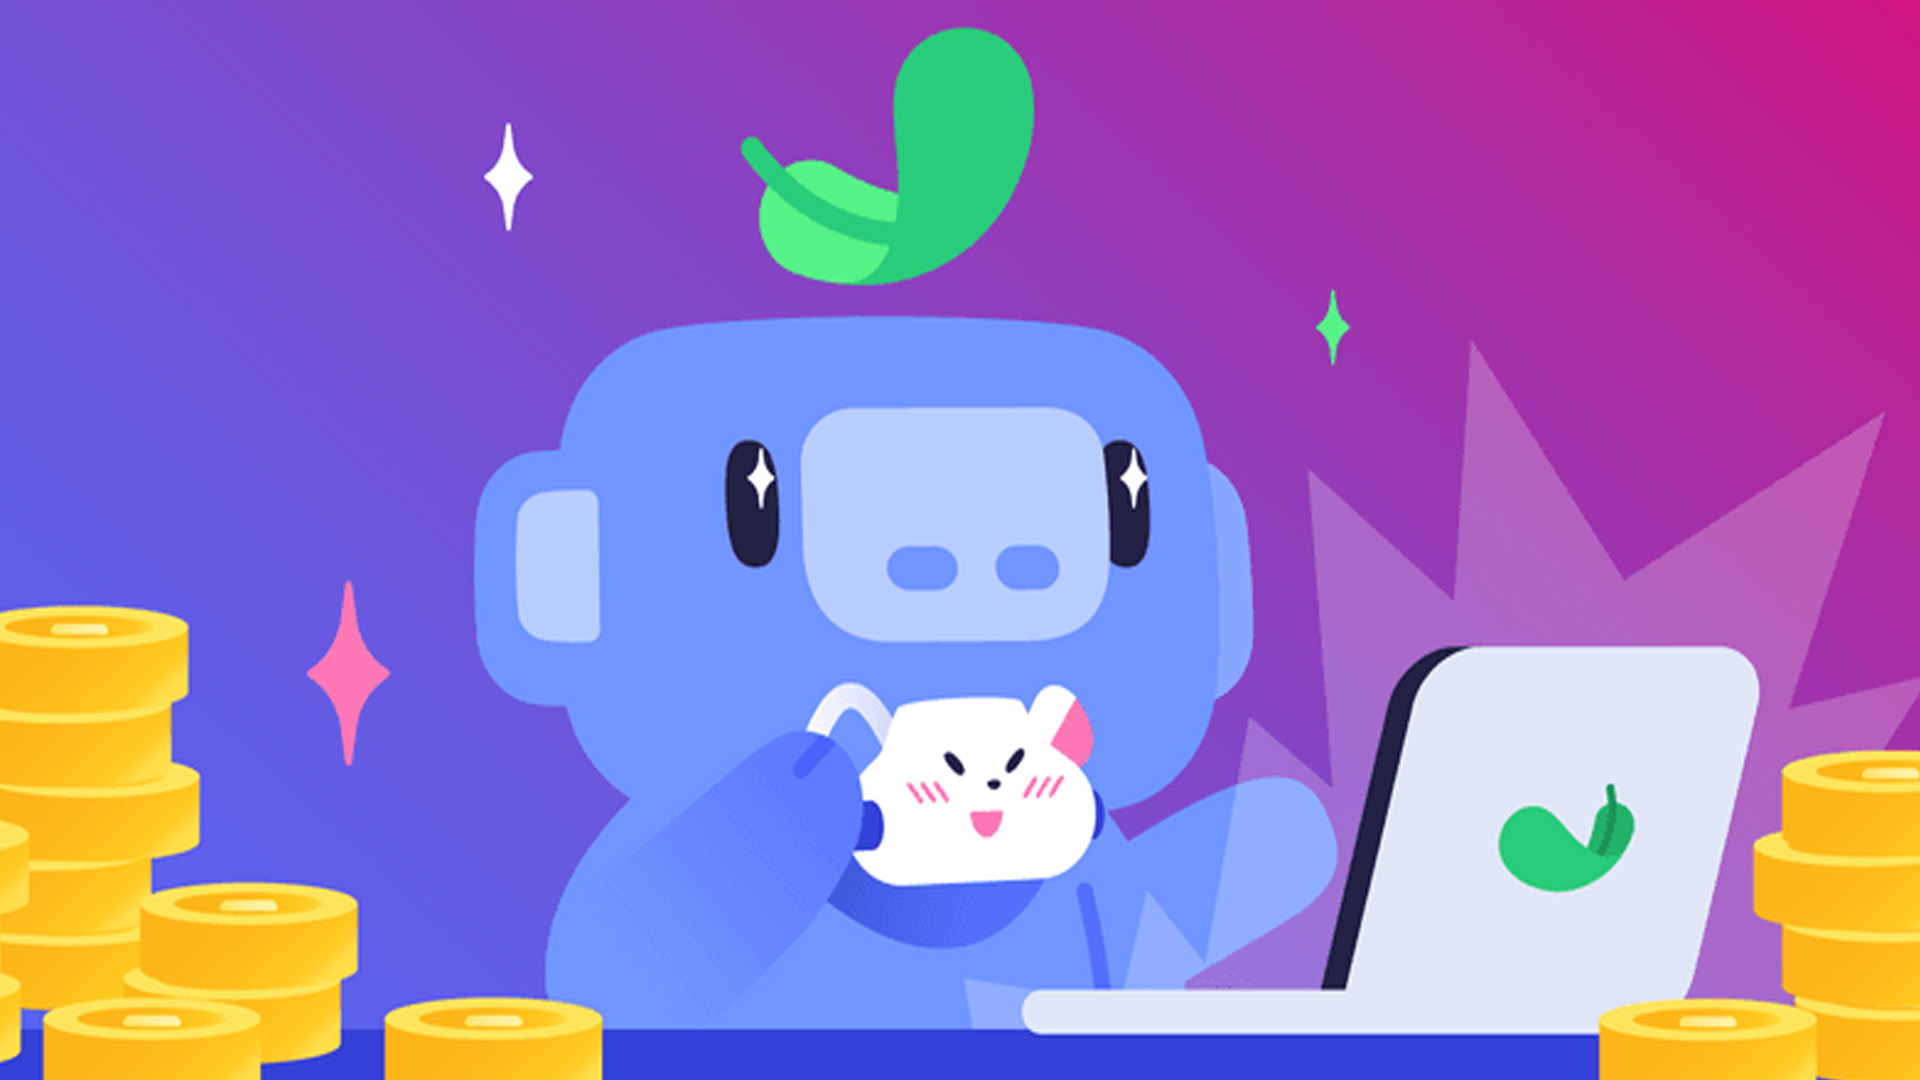 Discord wants to become Patreon with these new features